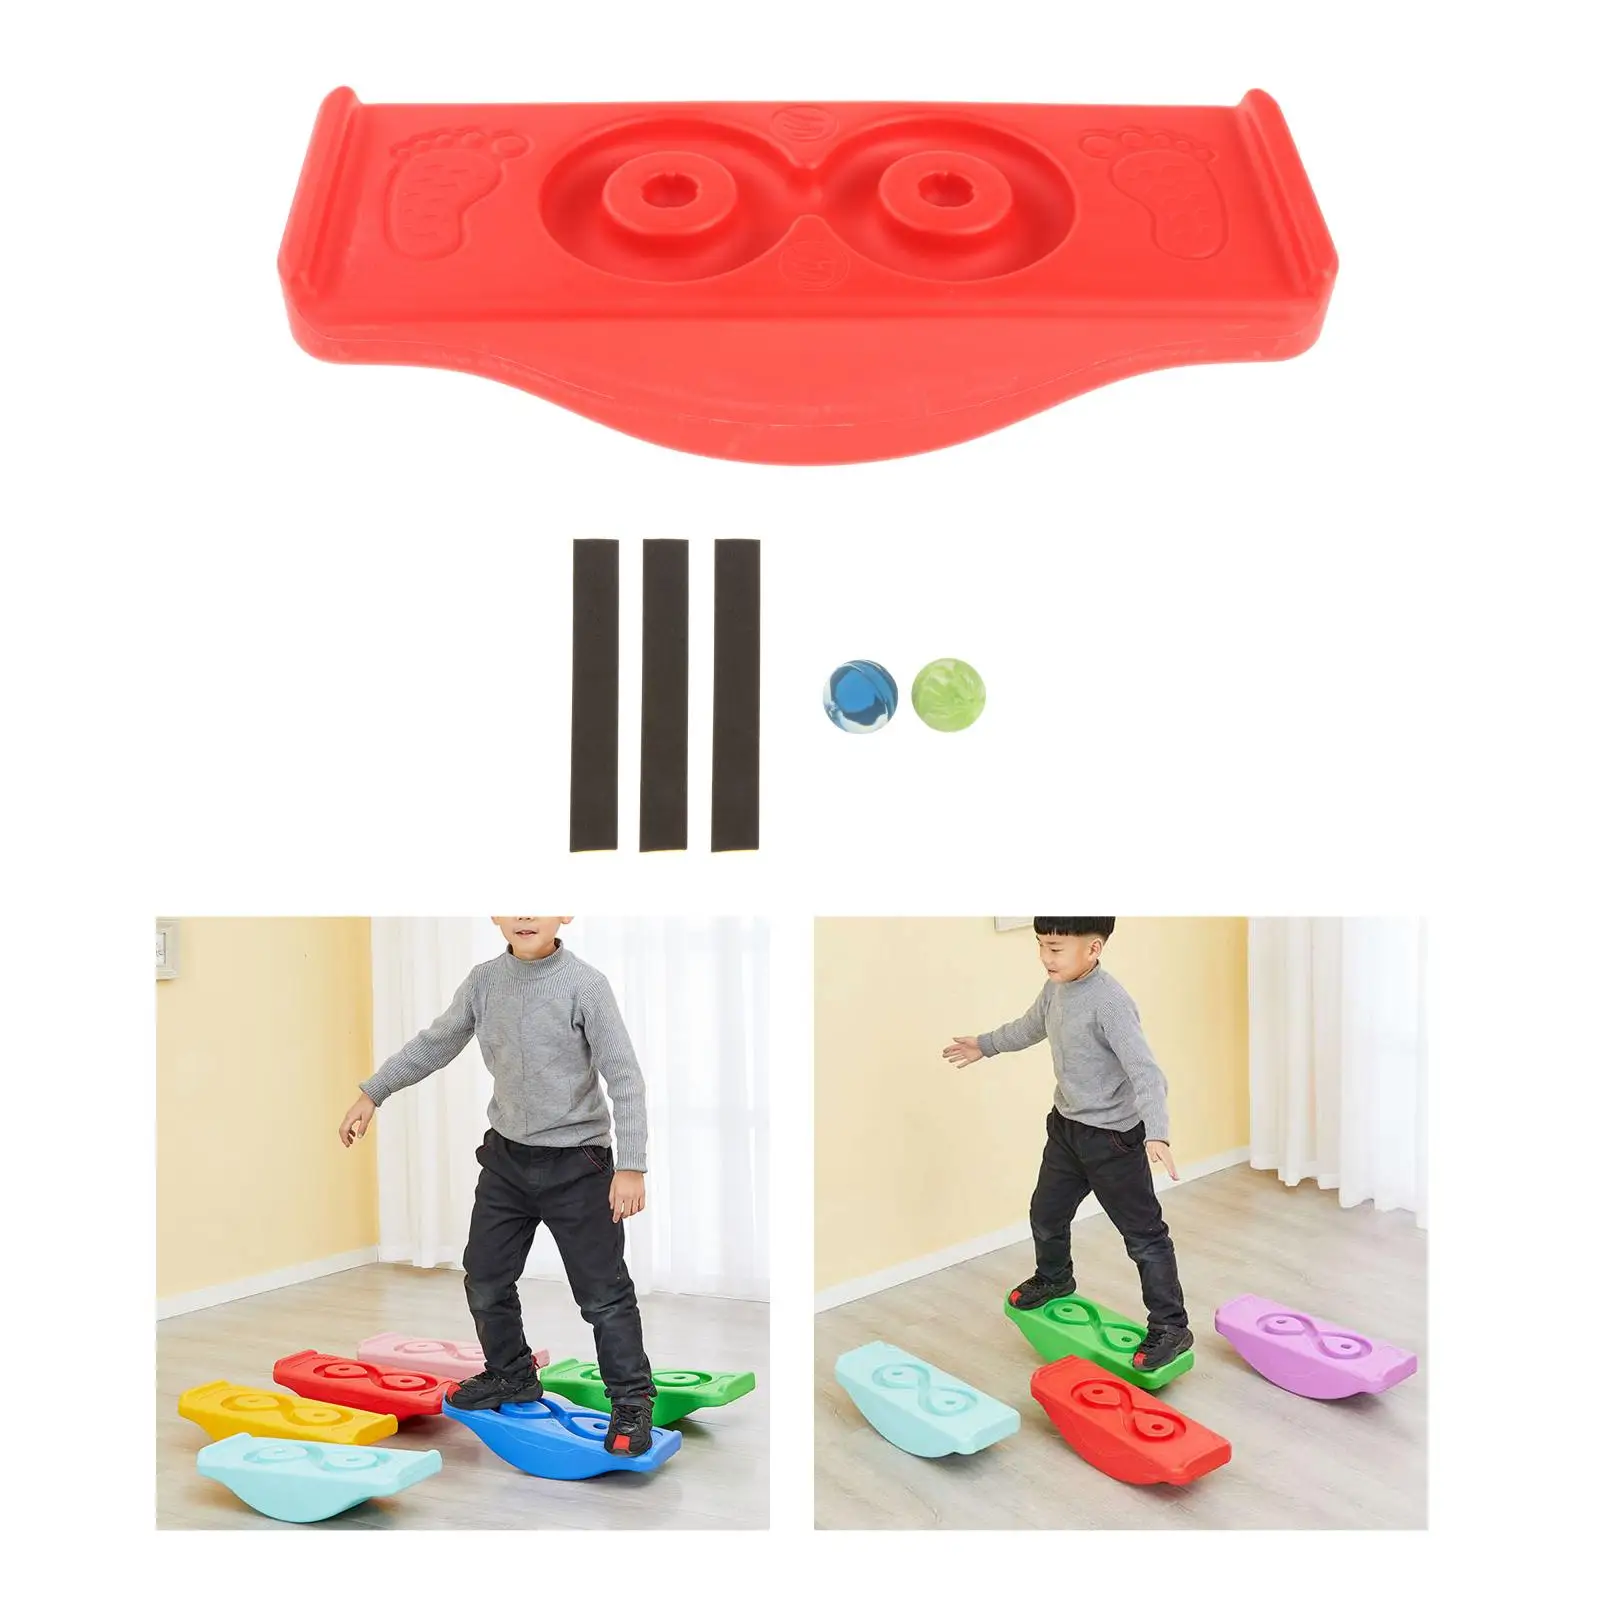 Wobbly Balance Board Sports Outside Children Kids Exercise Indoor Outdoor Seesaw Toy